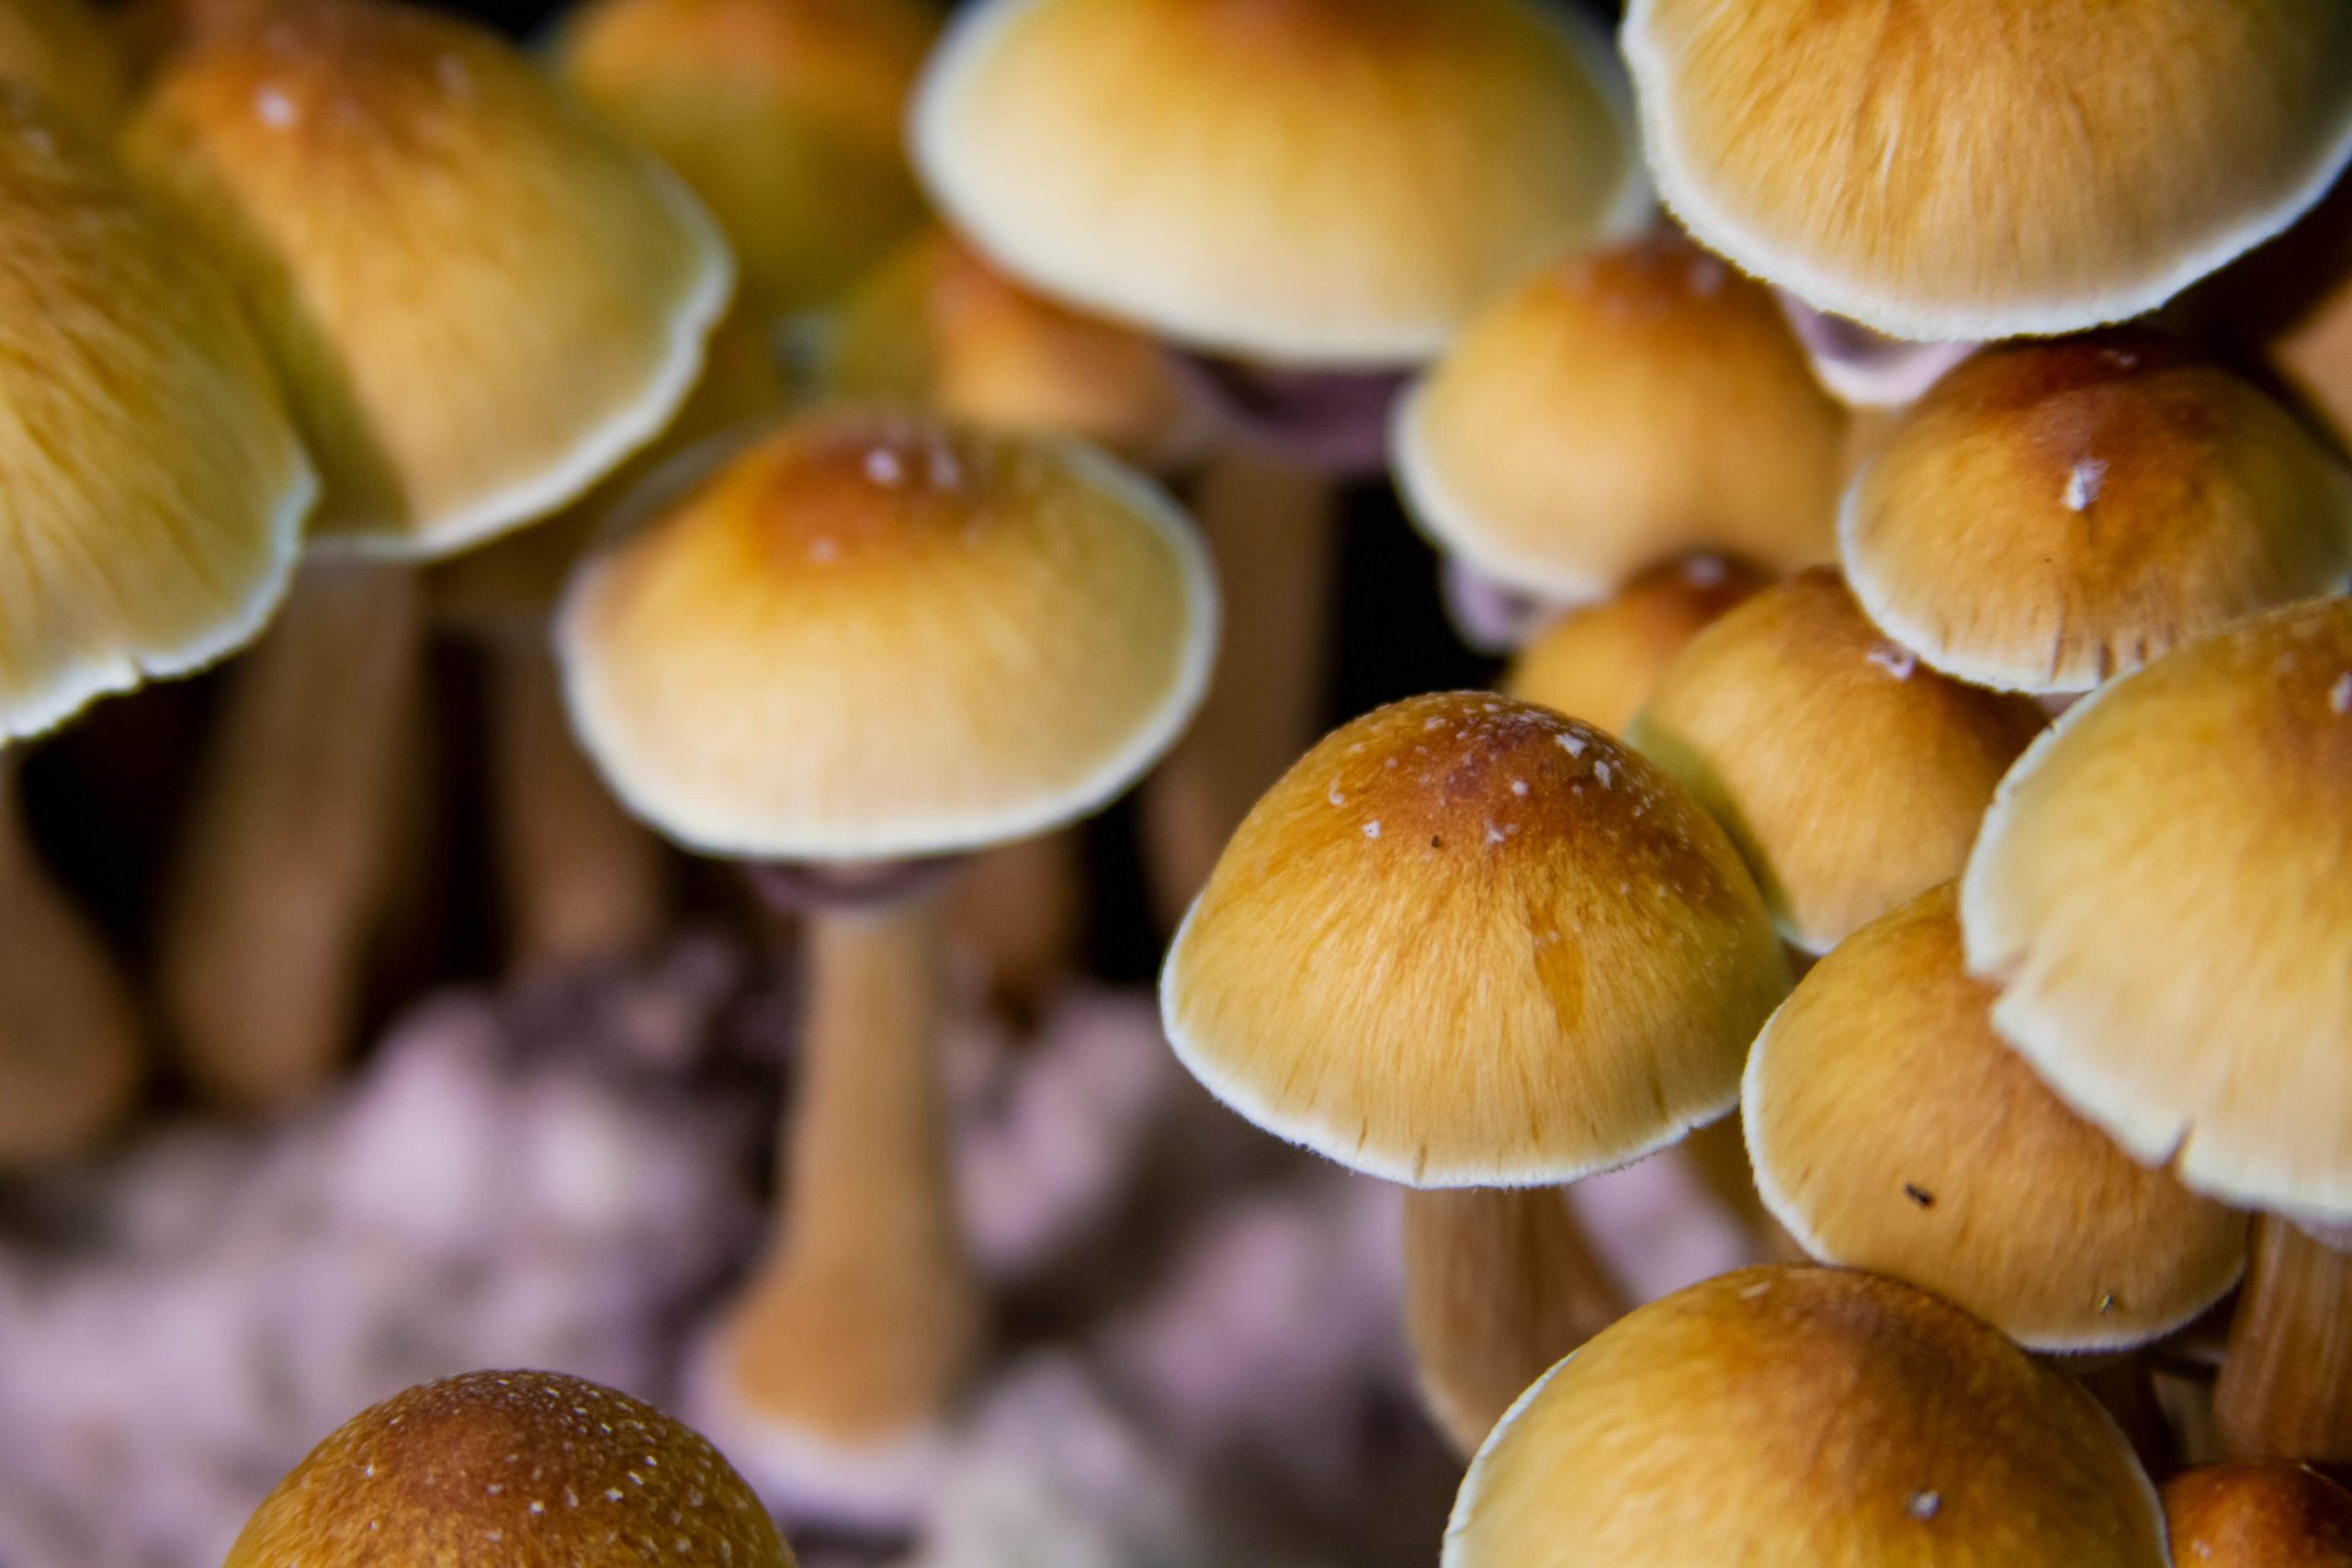 Researchers Studying Psilocybin as Treatment for Obesity